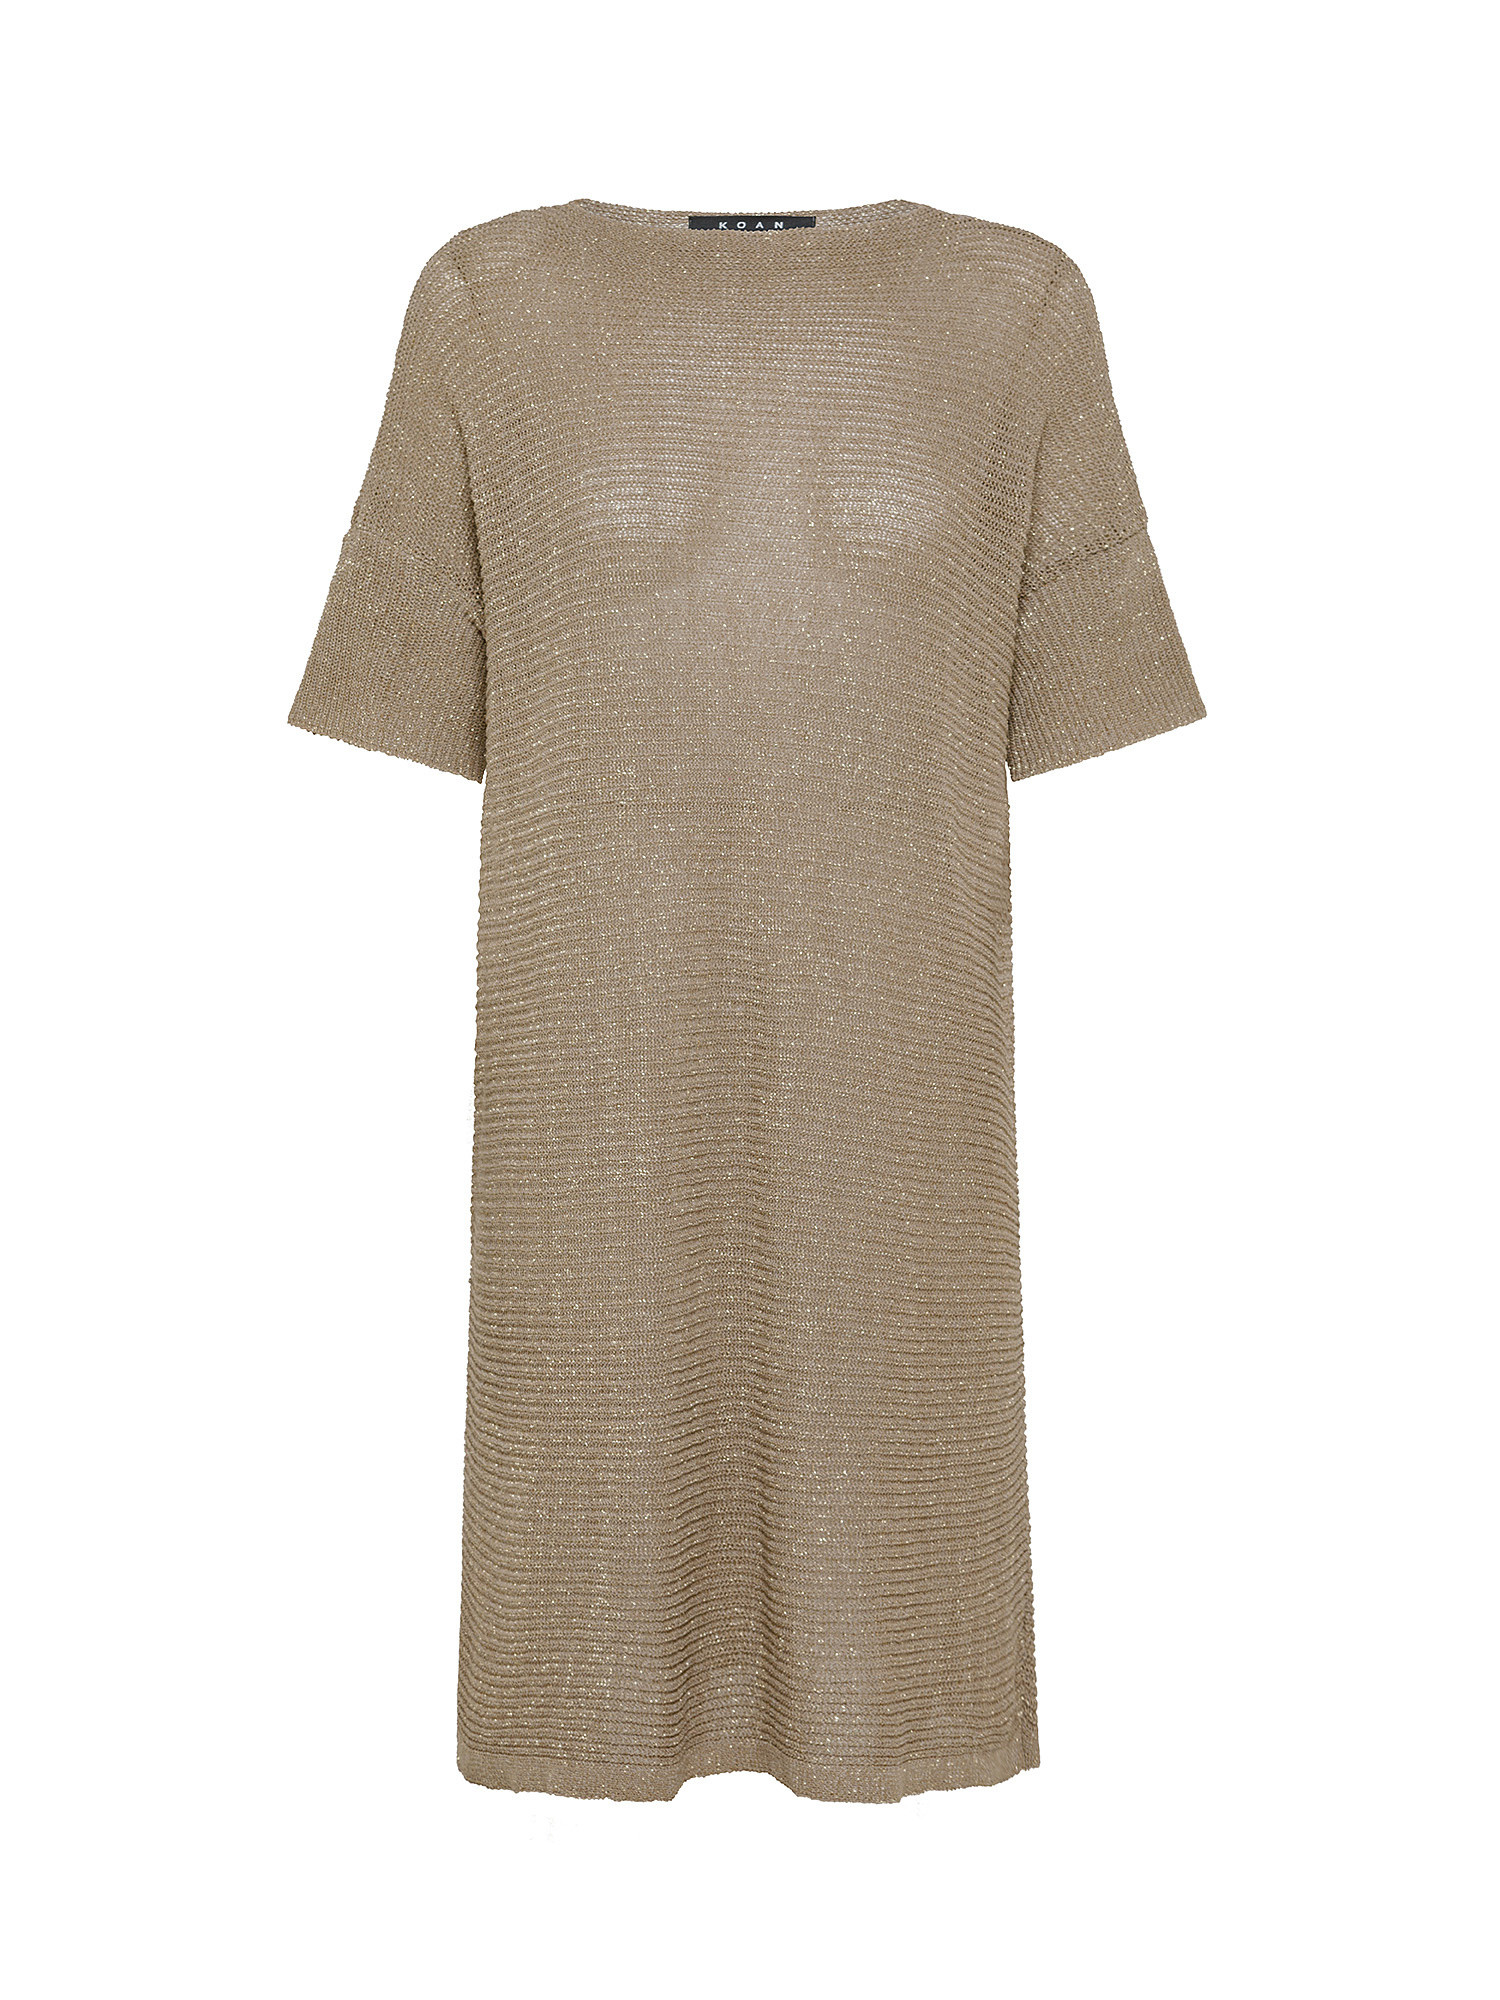 Knitted dress, Taupe Grey, large image number 0